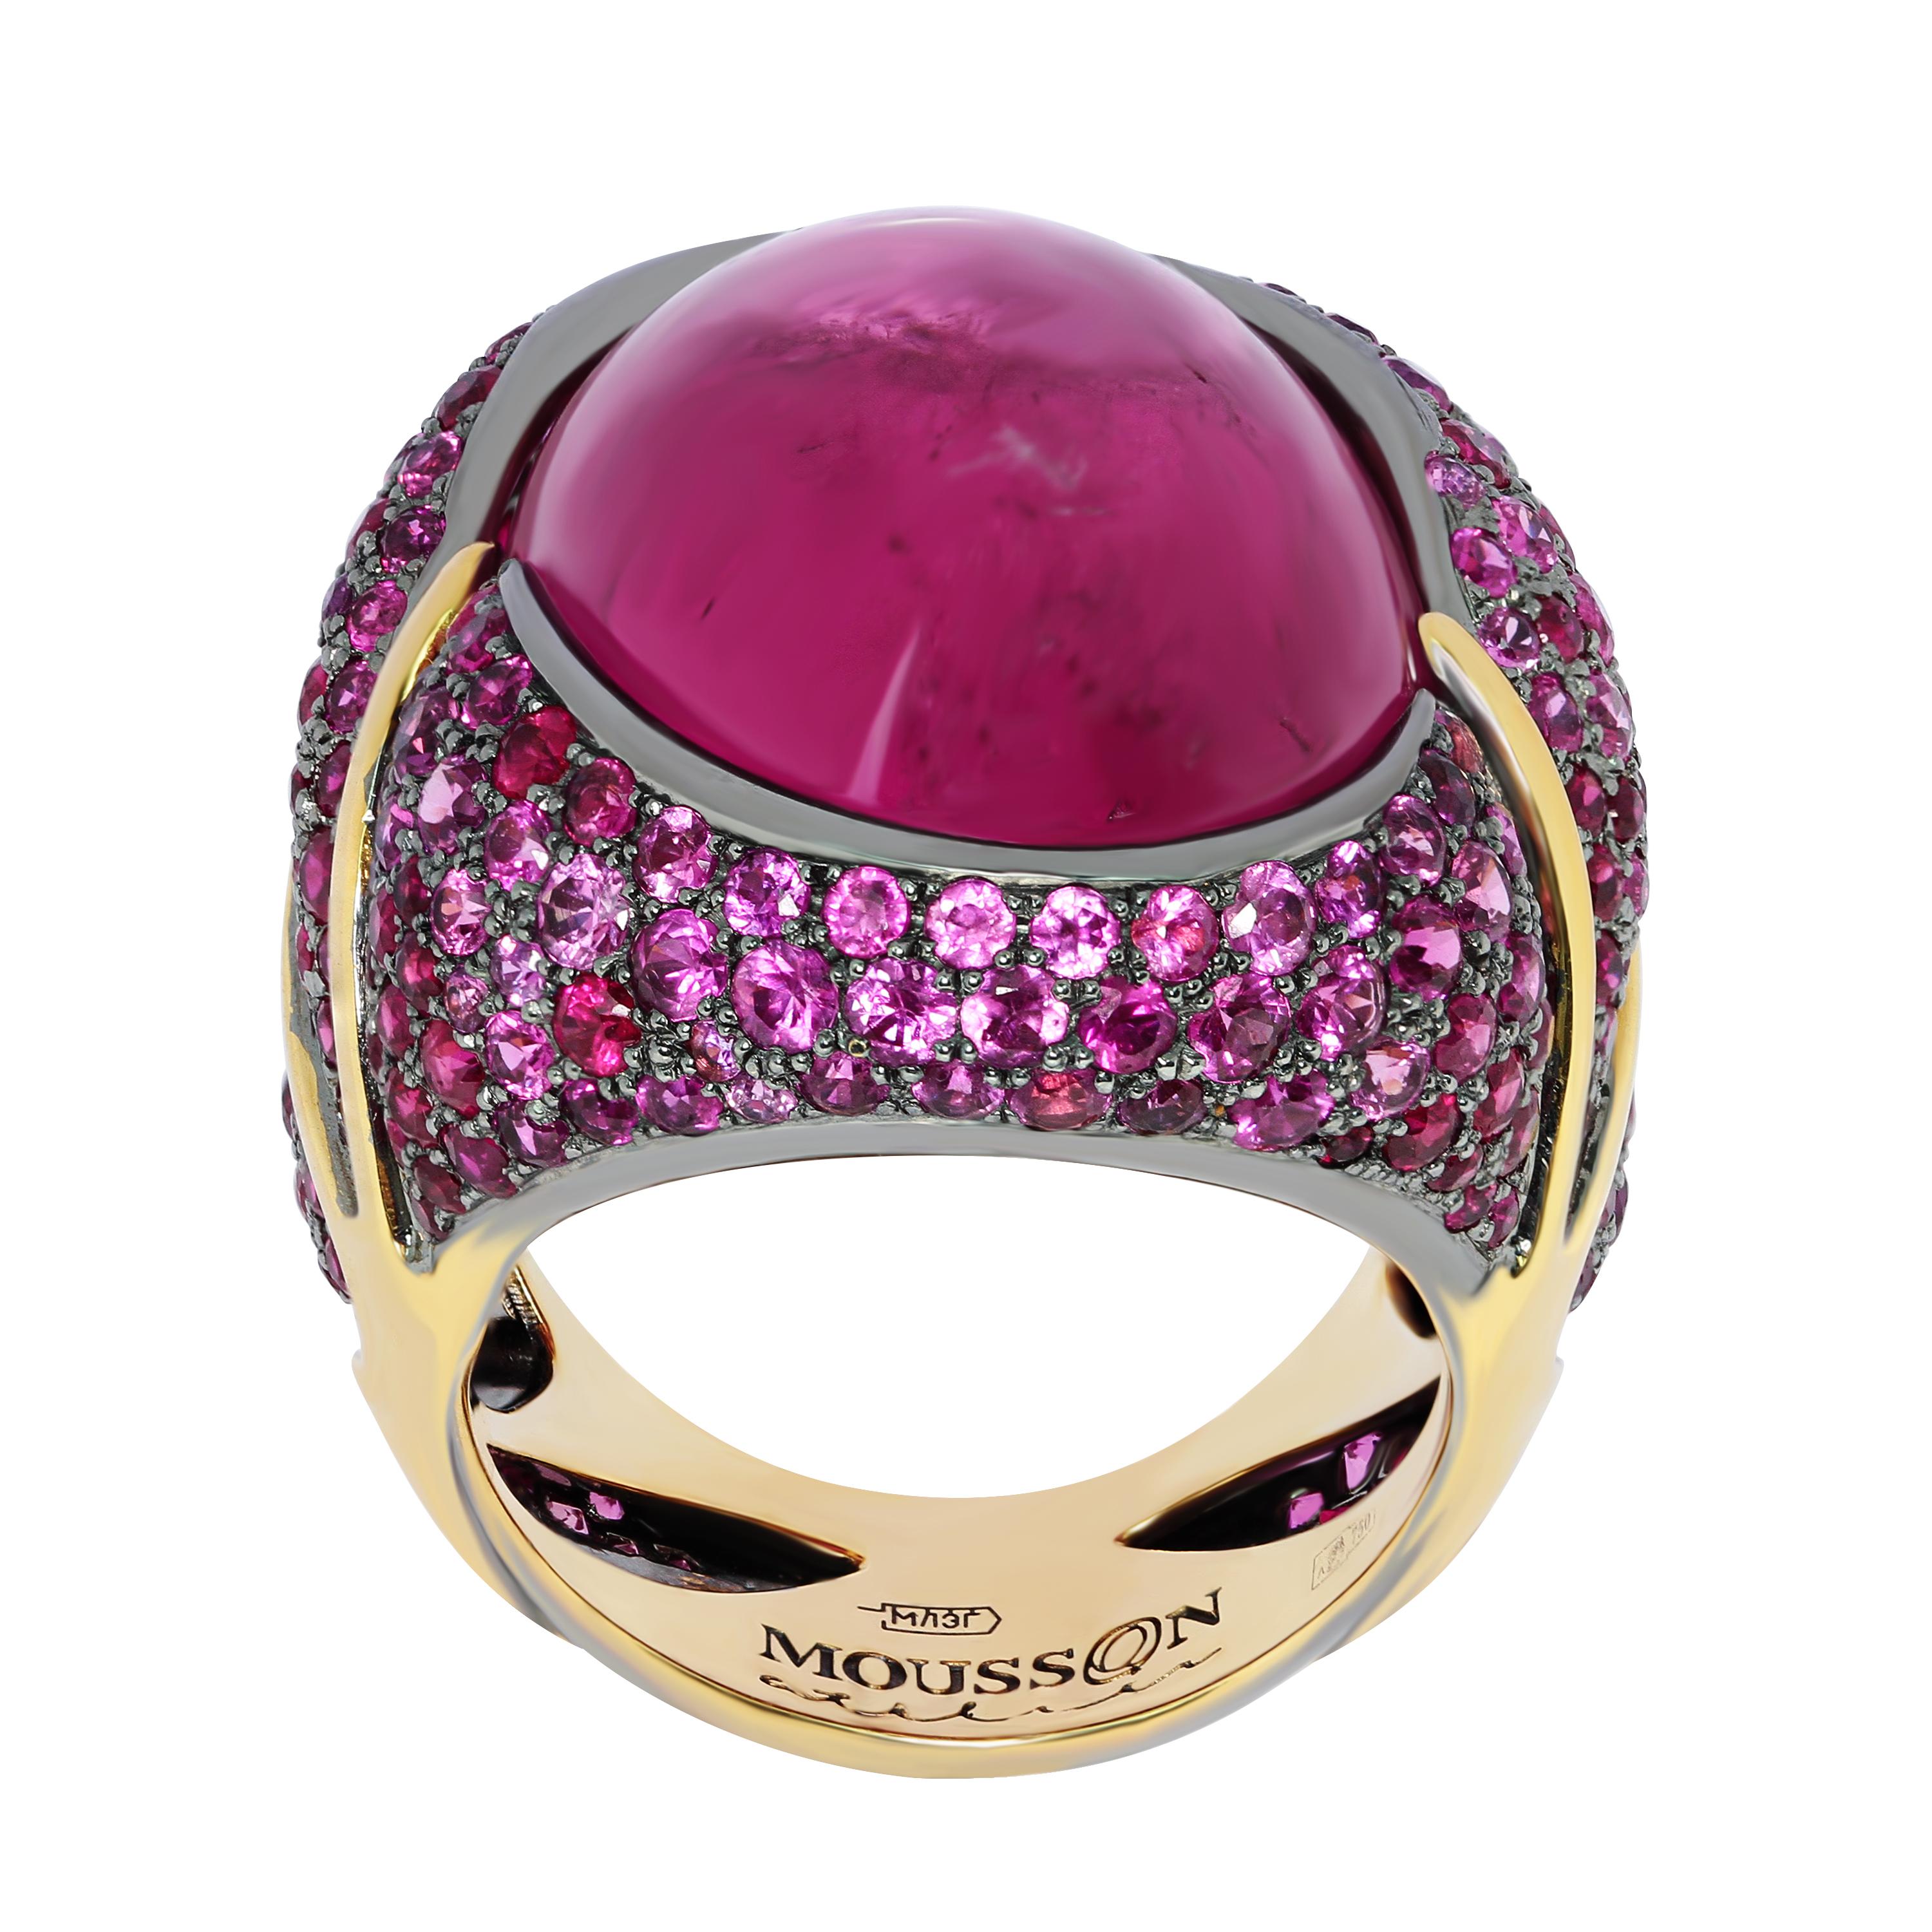 Pink Tourmaline 23.33 Carat Ruby Pink Sapphire 18 Karat Yellow Gold Ring
Absolutely spactacular Pink oval Cabochon shape Tourmaline weighing 23.33 Carat in our Ring from 